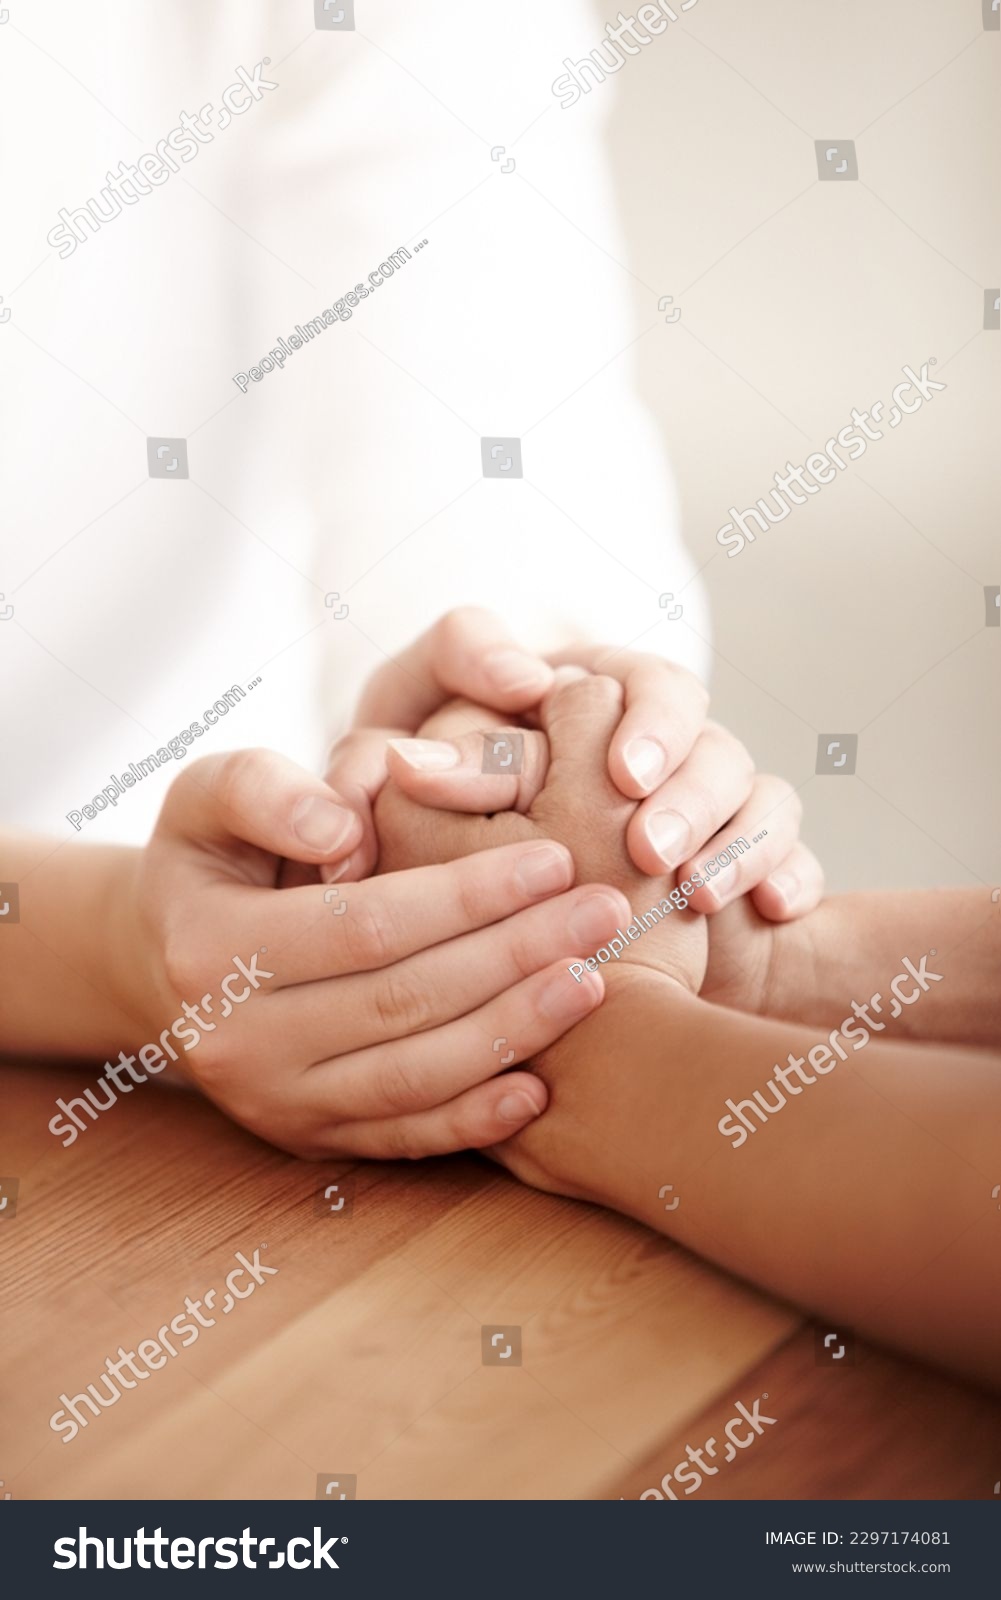 Empathy, love and spiritual with people holding hands in comfort, care or to console each other. Trust, help or support with friends praying together during depression, anxiety or the pain of loss #2297174081